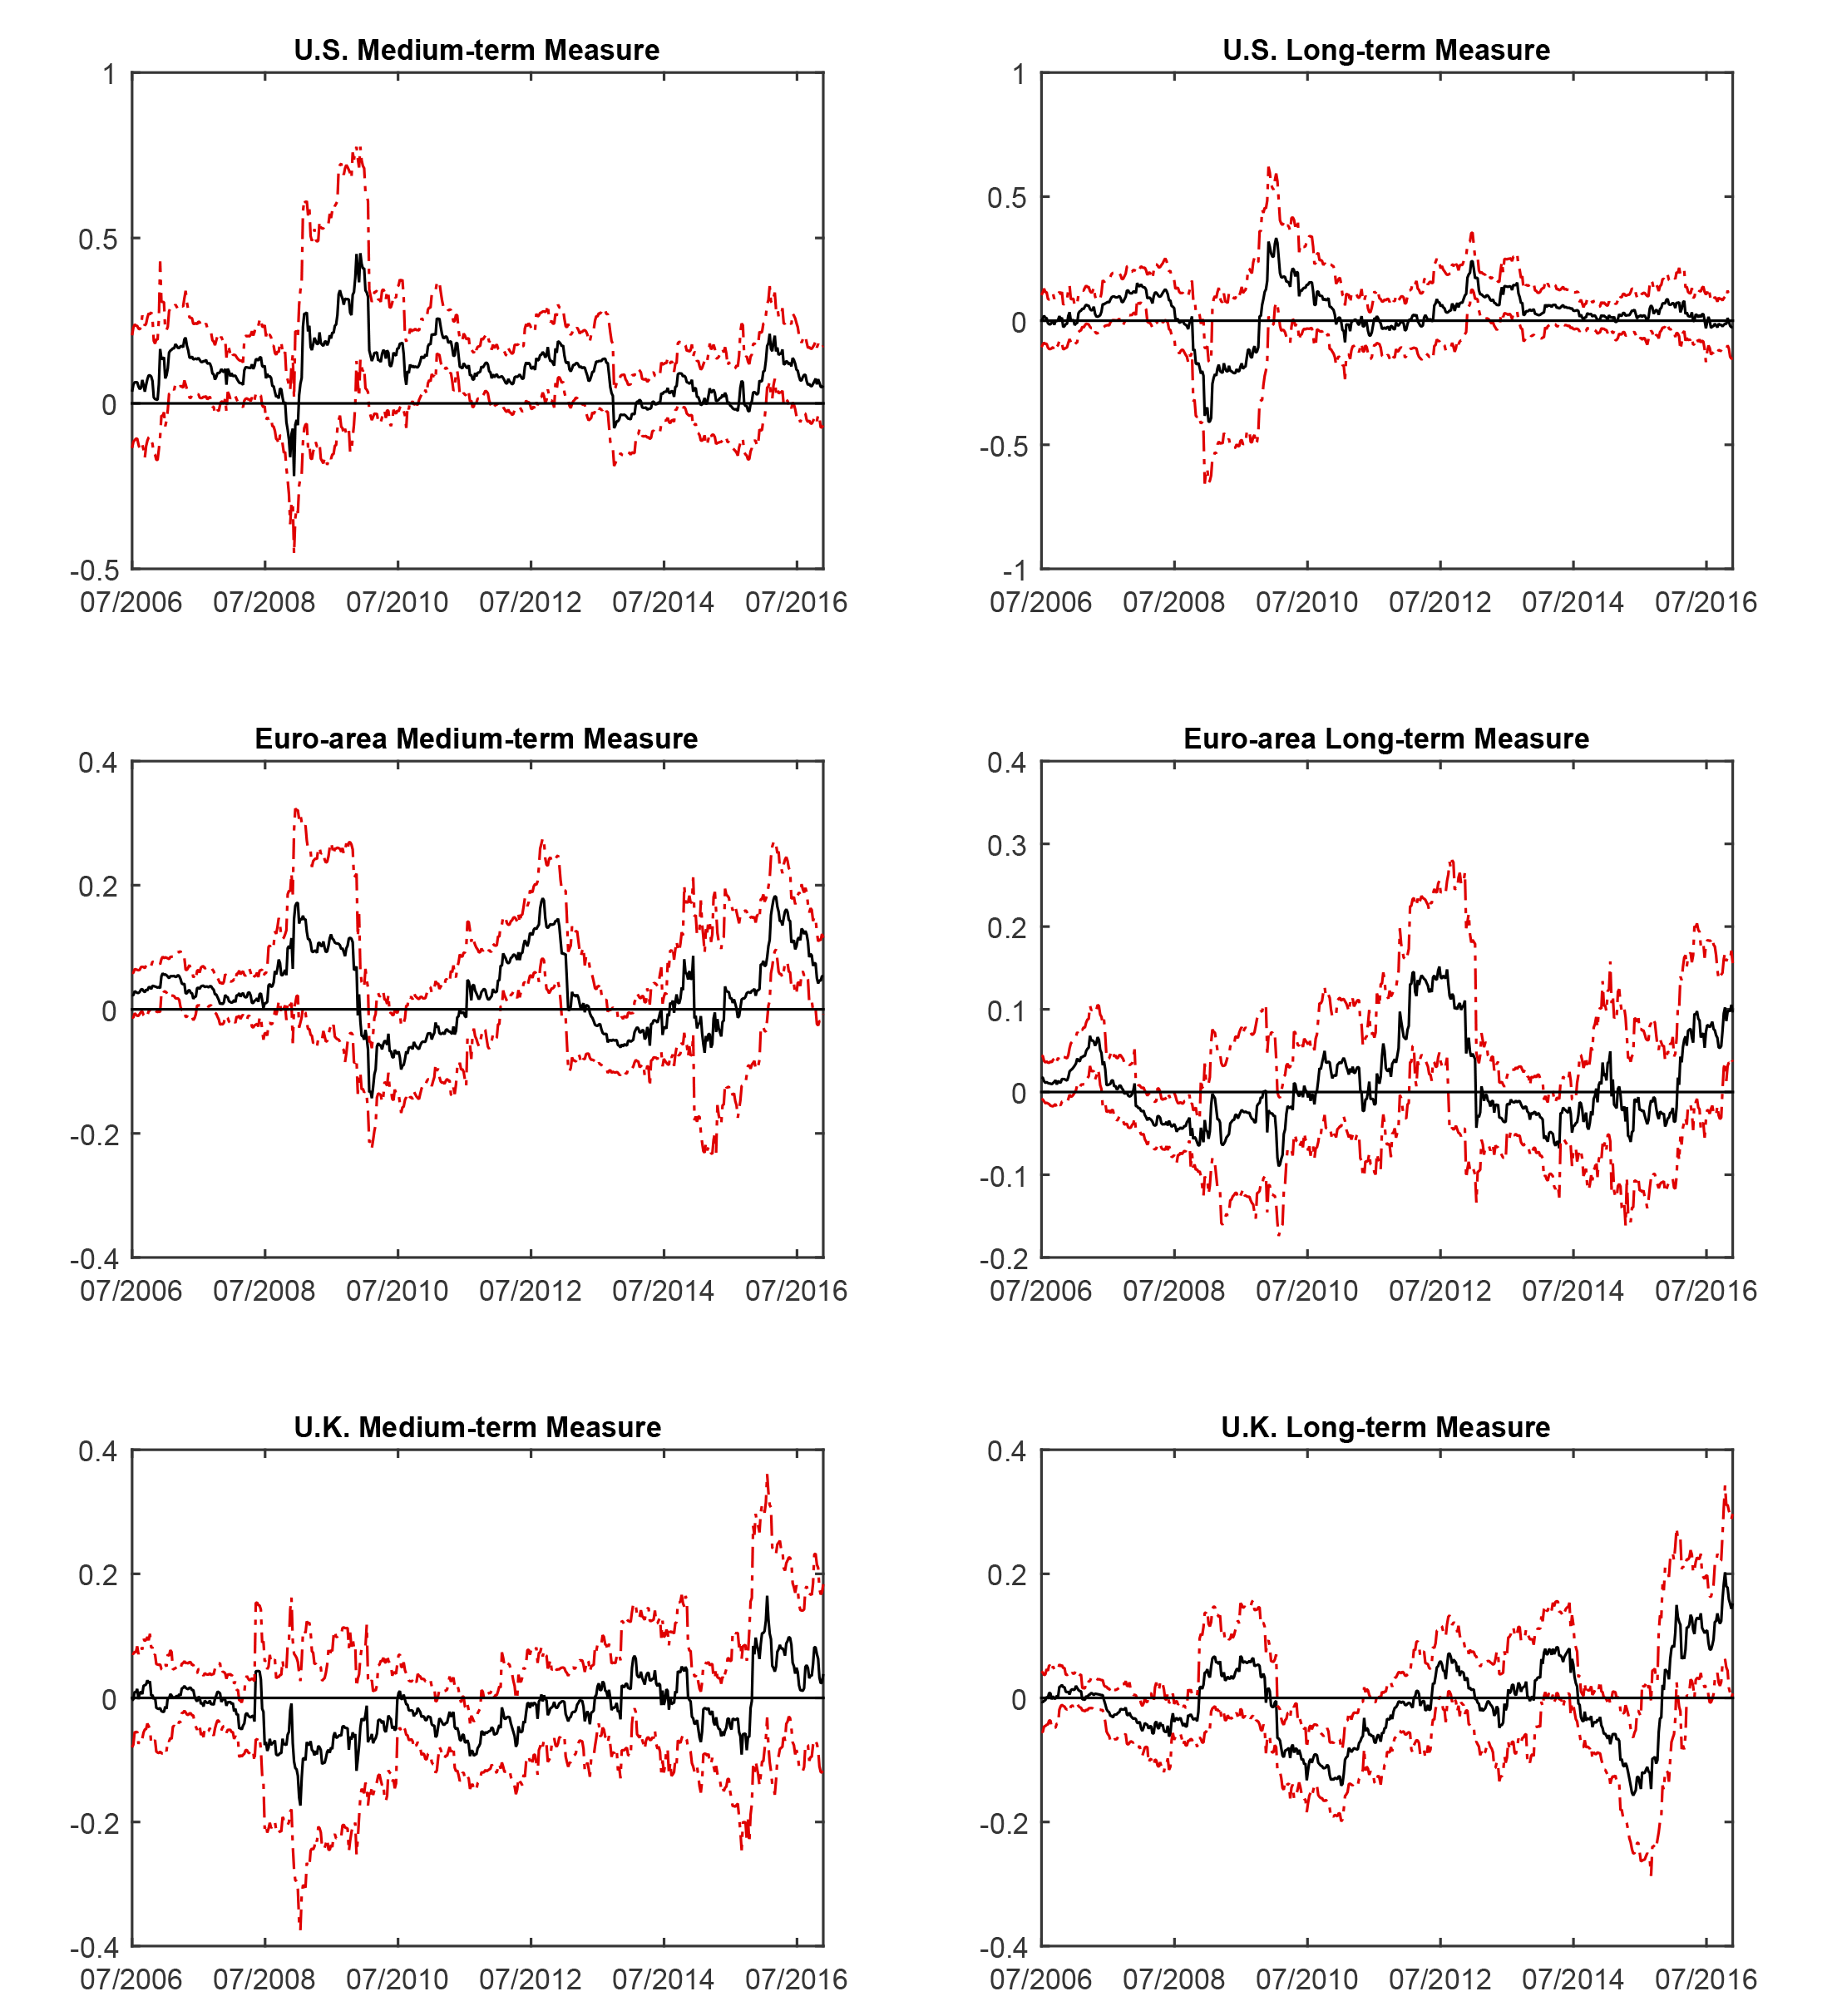 Figure 4: Macroeconomic News Surprises and Inflation Compensation Measures. See accessible link for data.